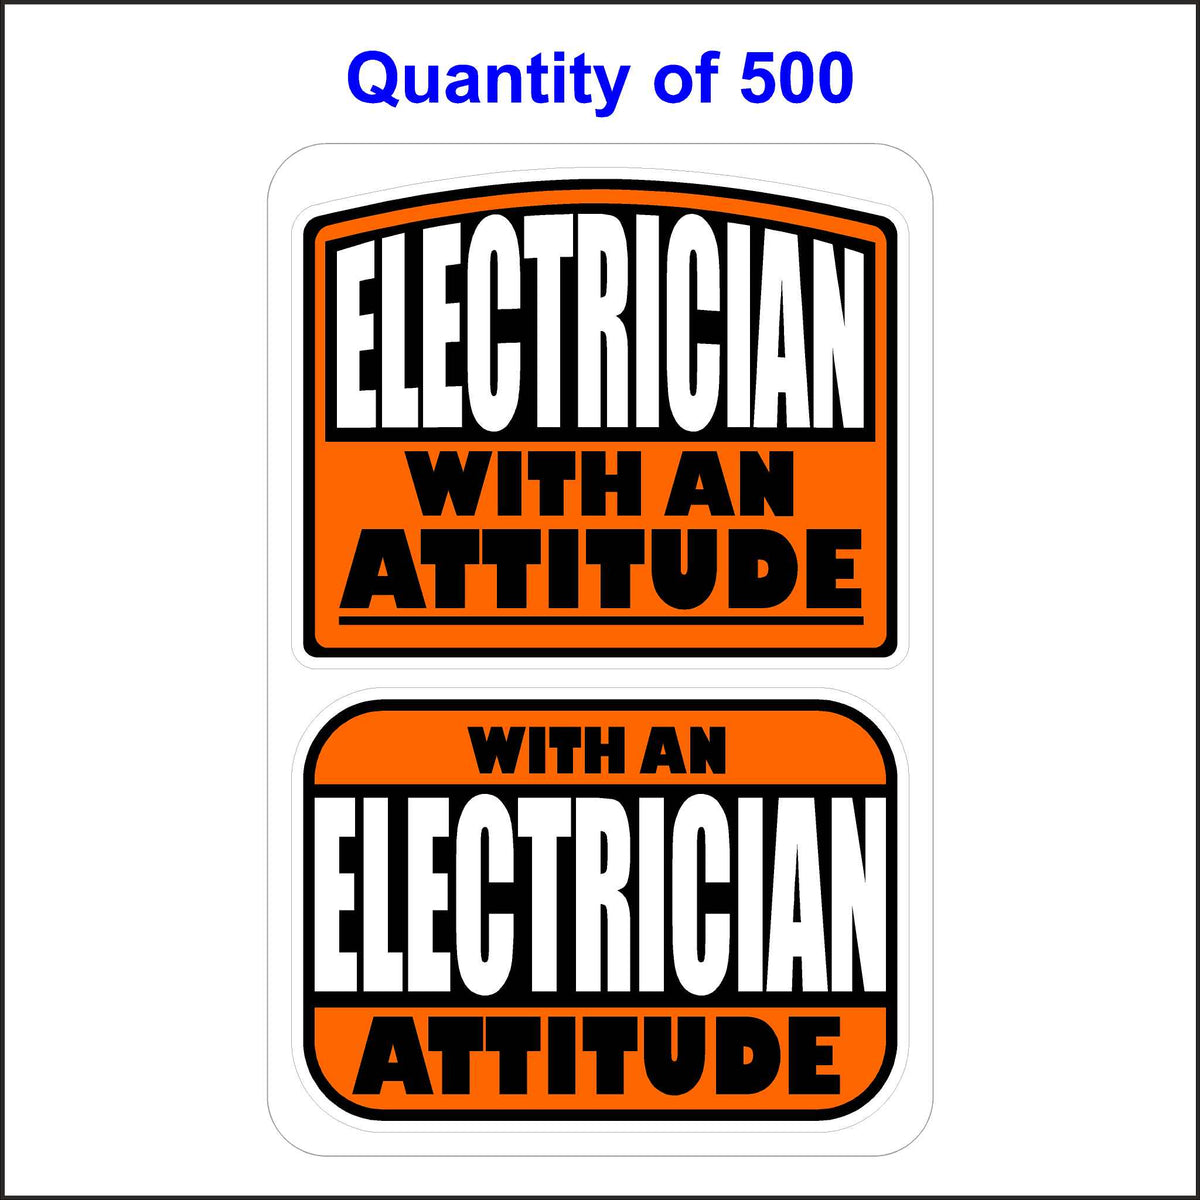 Electrician With An Attitude Stickers 500 Quantity.